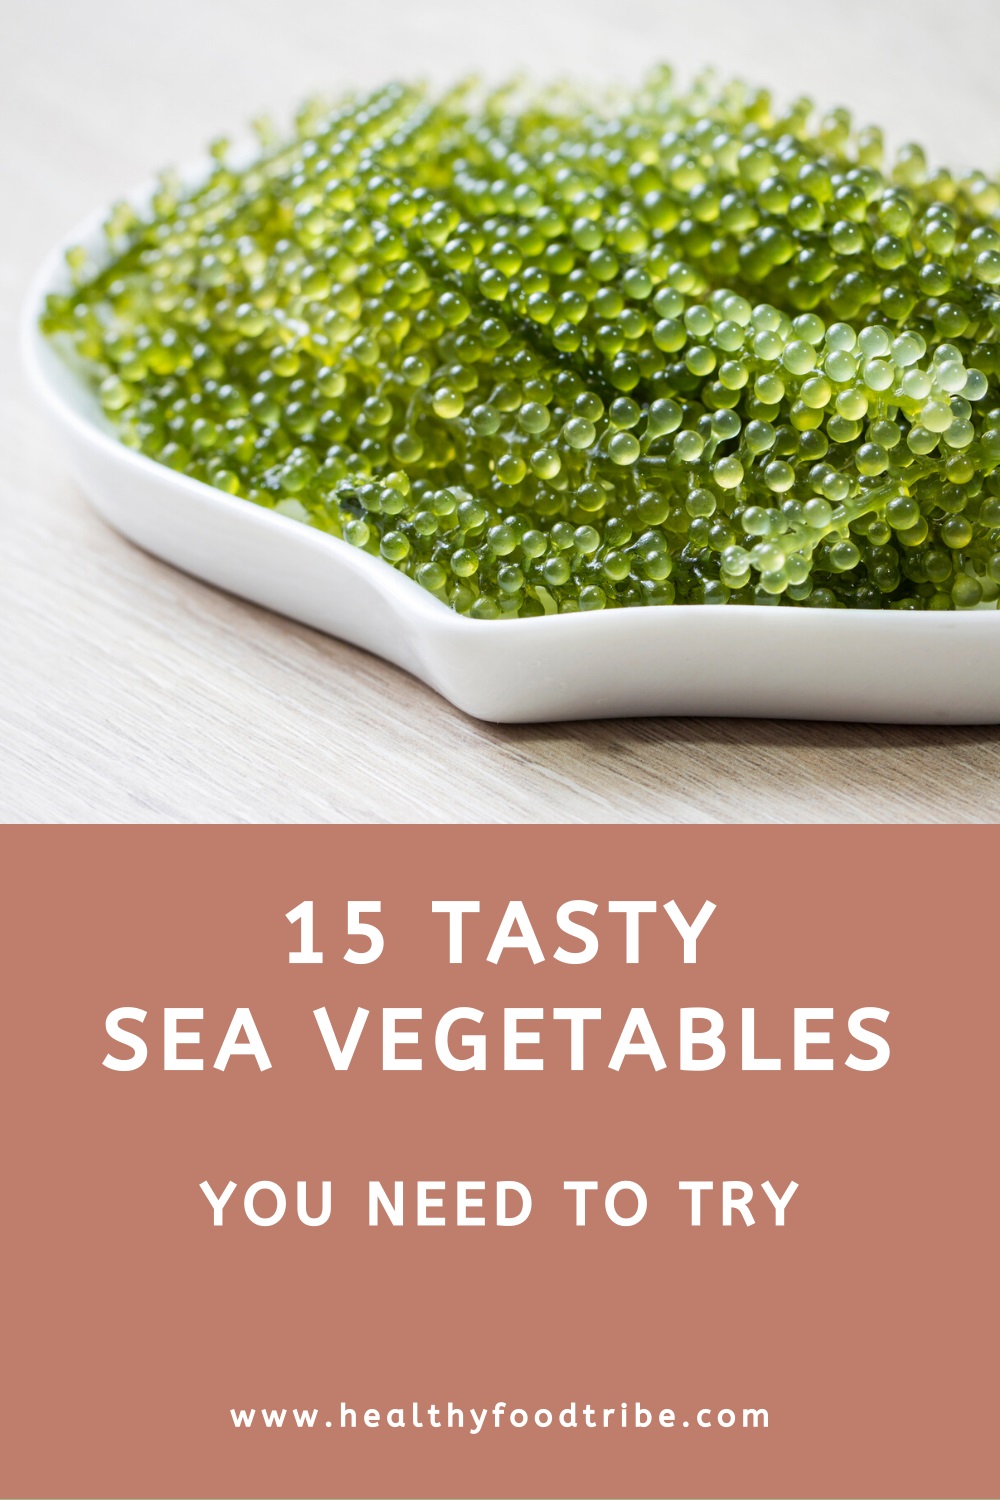 15 Tasty sea vegetables to try